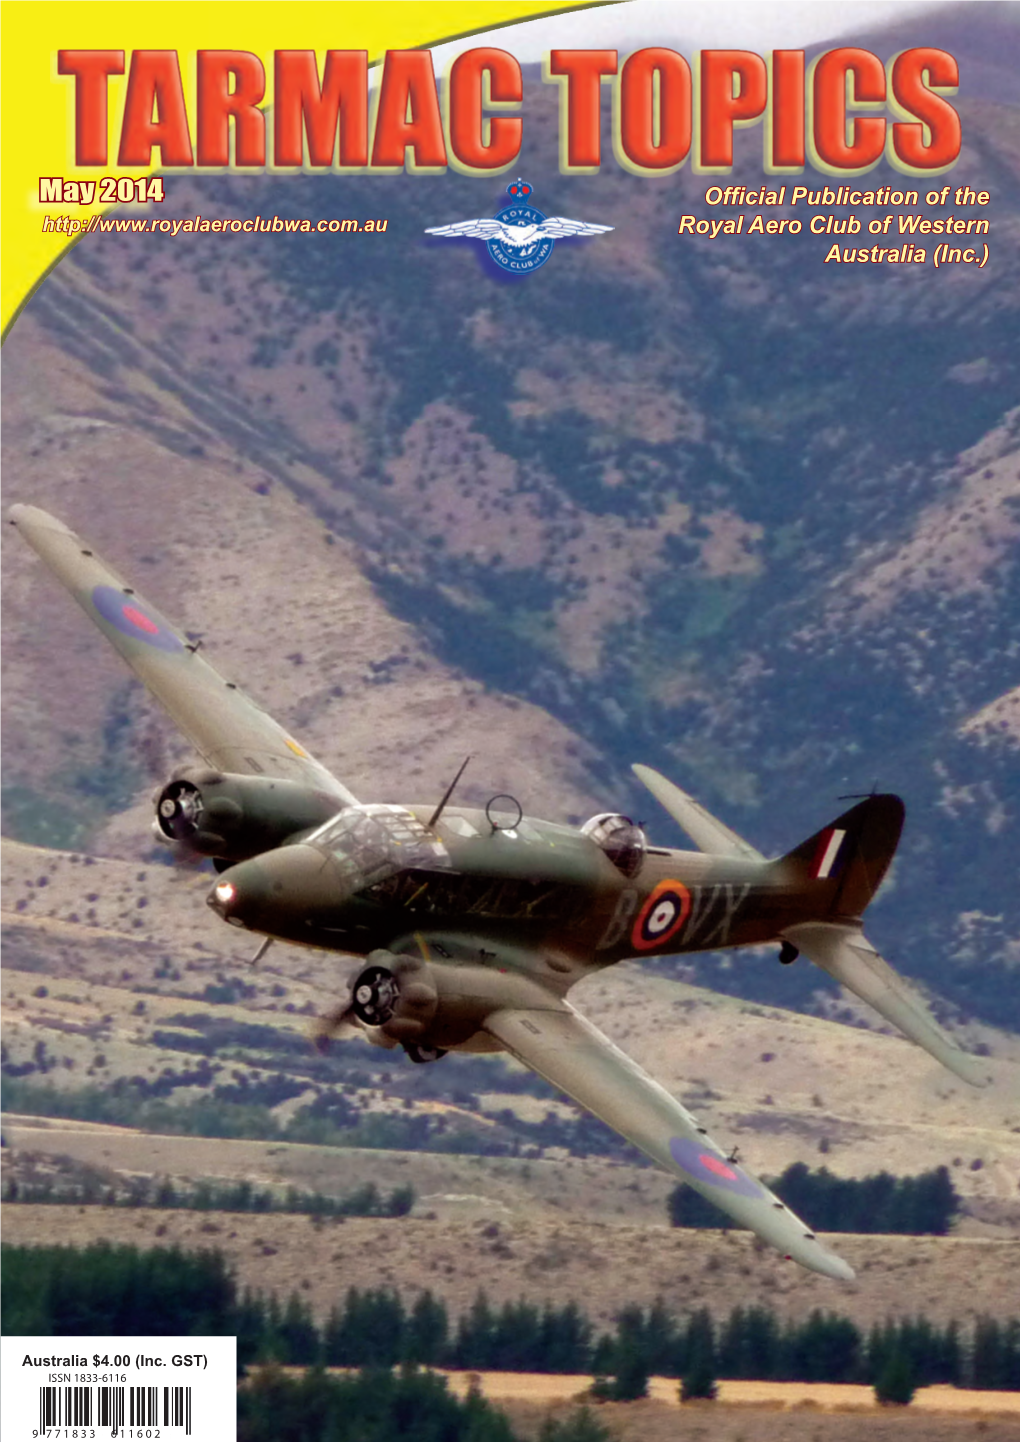 May 2014 Official Publication of the Royal Aero Club of Western Australia (Inc.)